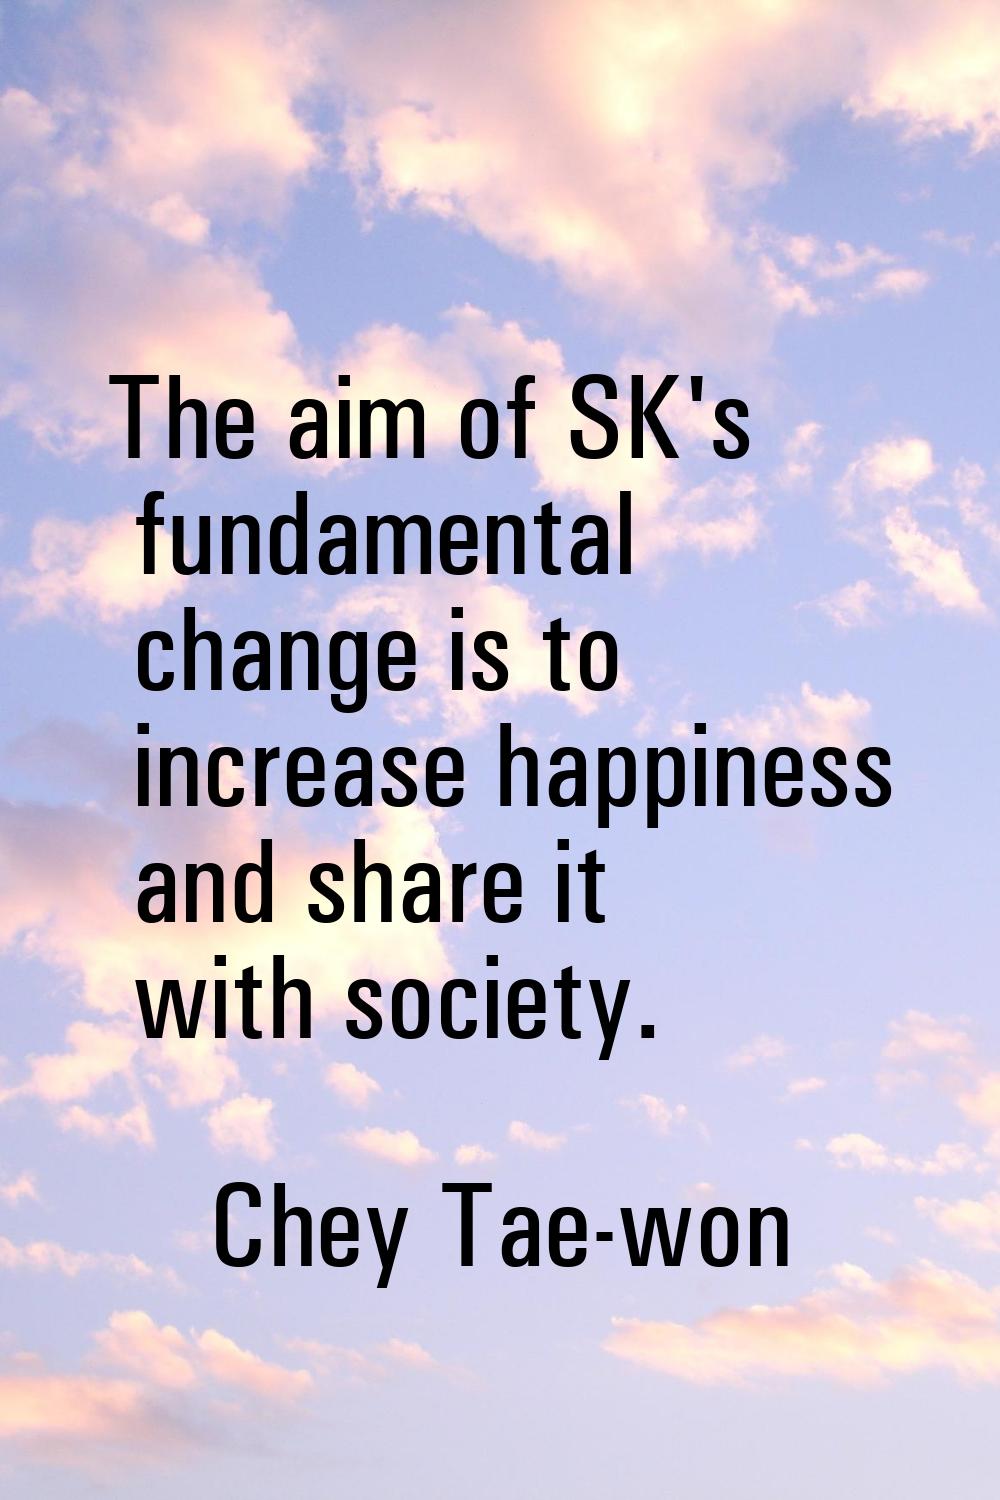 The aim of SK's fundamental change is to increase happiness and share it with society.